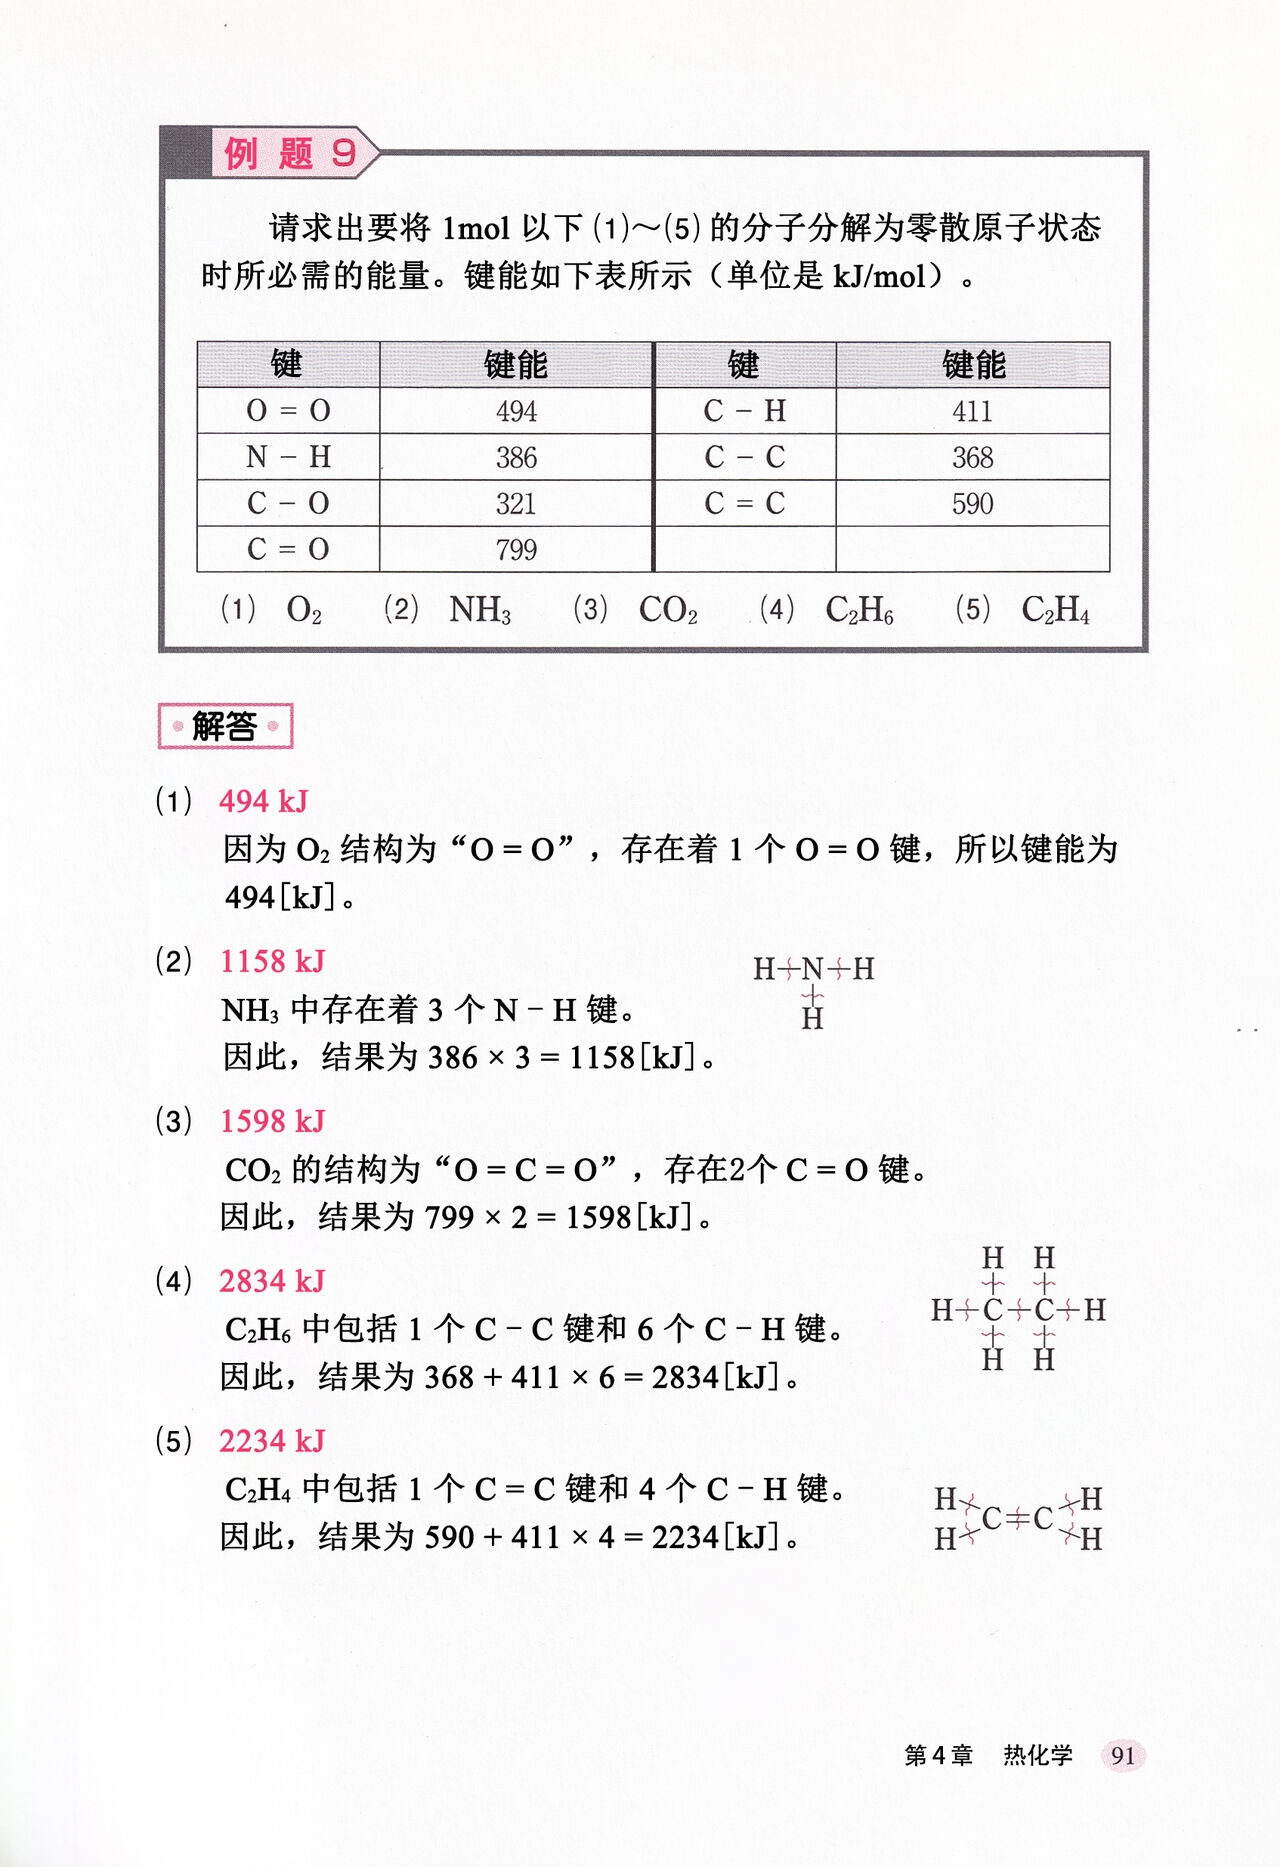 Let's Learn Chemistry with Lucky☆Star -Basic Theory- Section 1-5|和幸运星一起学化学 -理论篇- 第1-5章[Chinese][桃樹漢化組] 102